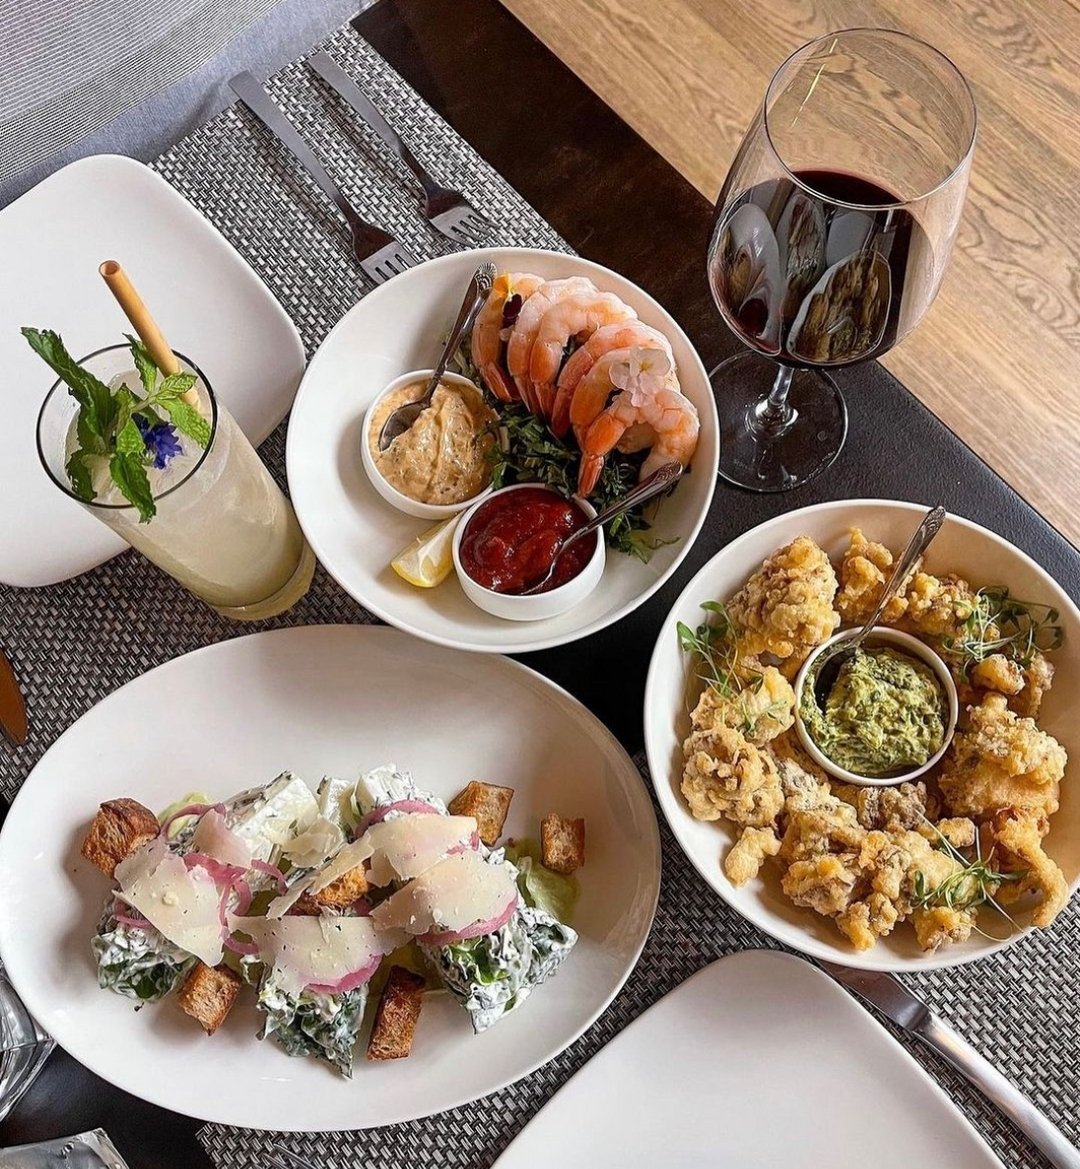 Ride into the culinary Wild West this #FoodieFriday at Goodnight's Prime Steak + Spirits 🤠🥩. 

Located in the heart of historic Healdsburg Plaza, they're serving up a frontier of flavors with an exquisite selection of prime steaks, adventurous cock